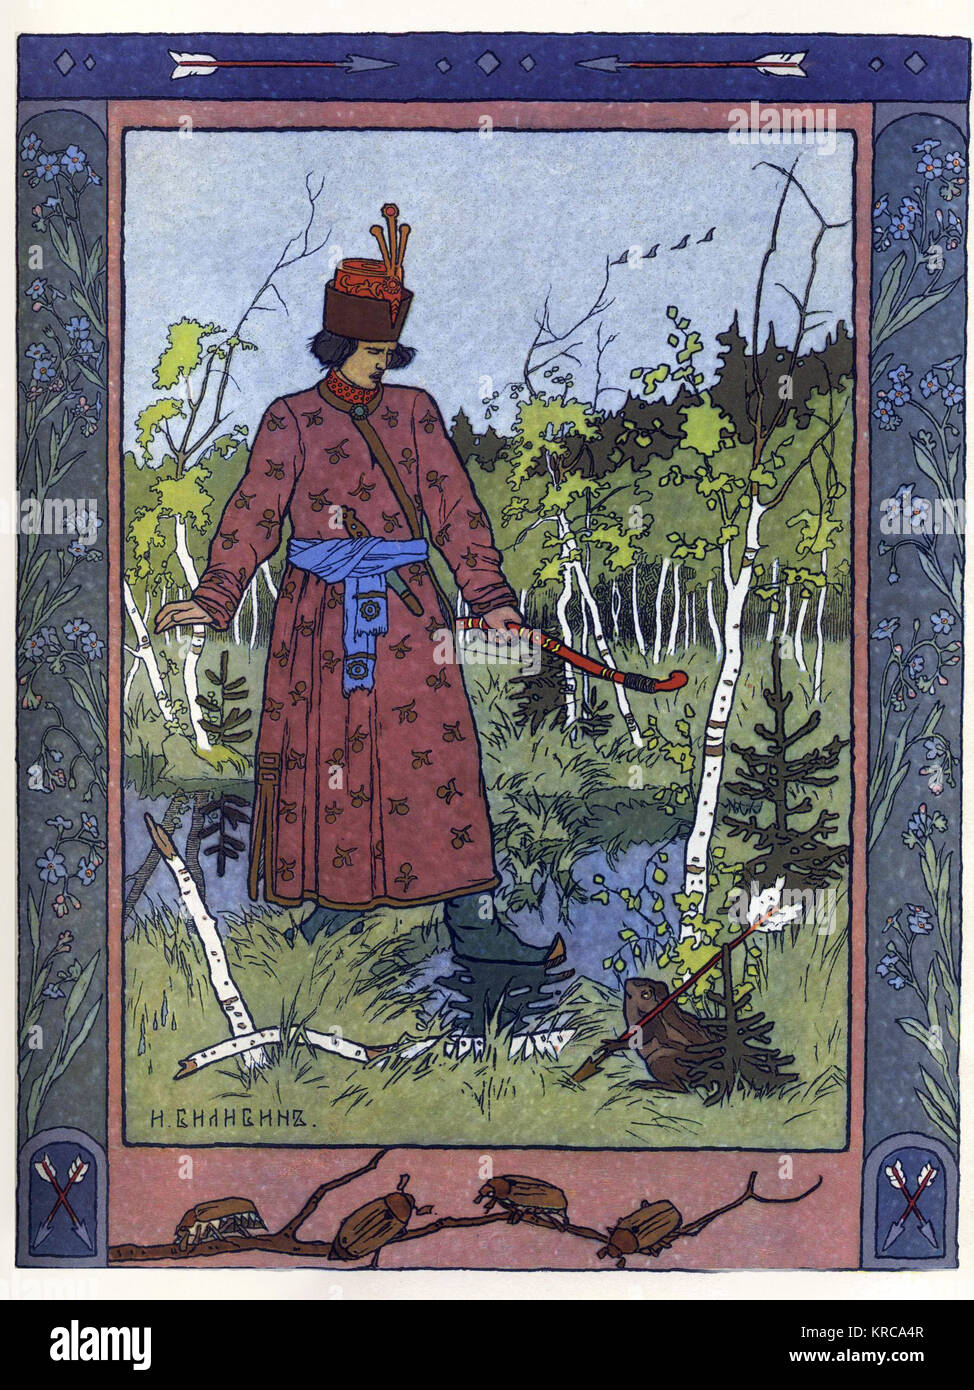 Ivan BILIBIN - the prince and the frog 1900 Stock Photo